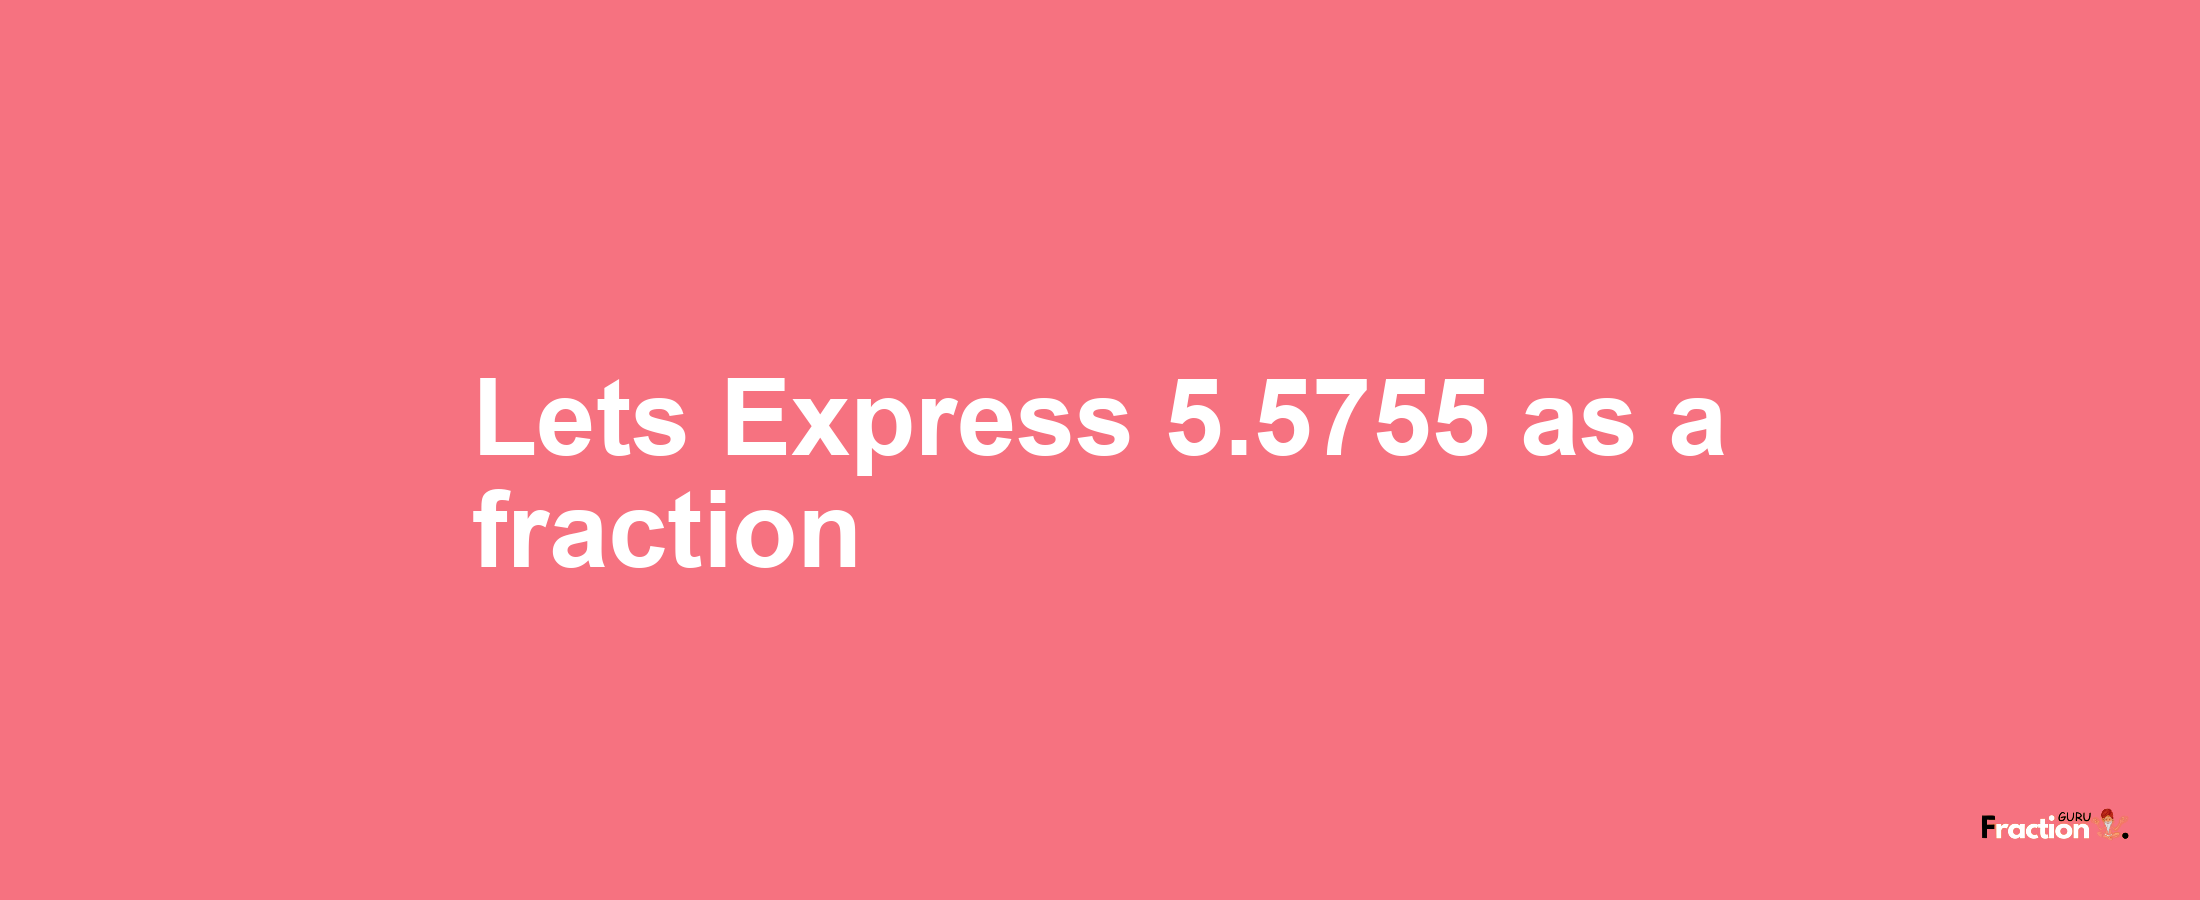 Lets Express 5.5755 as afraction